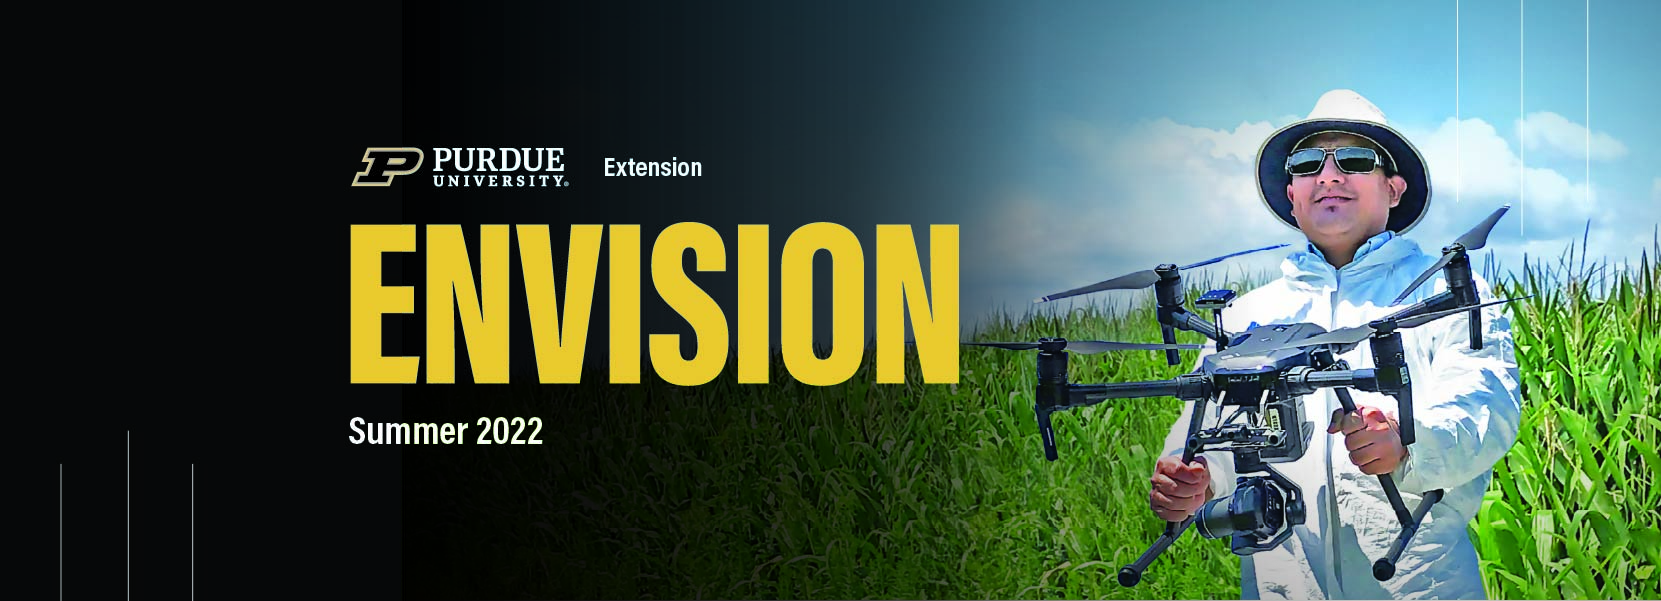 Purdue College of Agriculture and Extension Envision magazine, summer issue - man flying a drone in the field